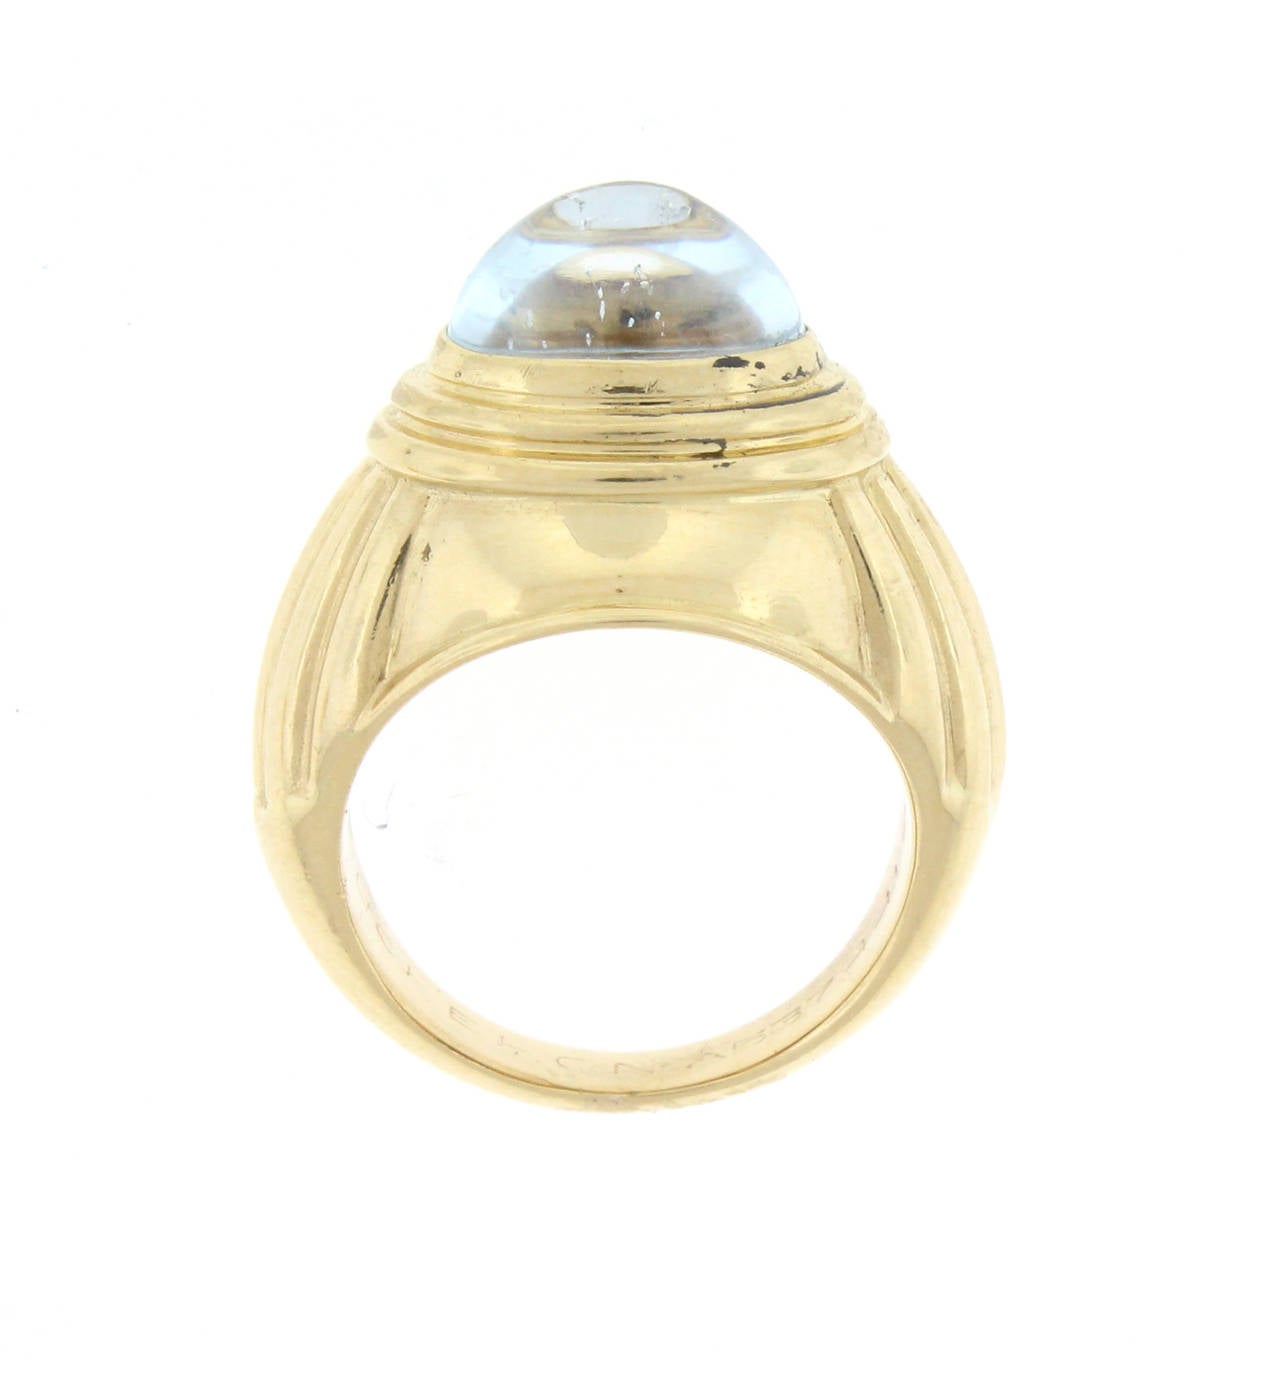 This 18 karat gold ring from the house of Boucheron features a 10 by 6.5mm cabochon aquamarine in an articulated gold setting. Size 51/2 maybe sized